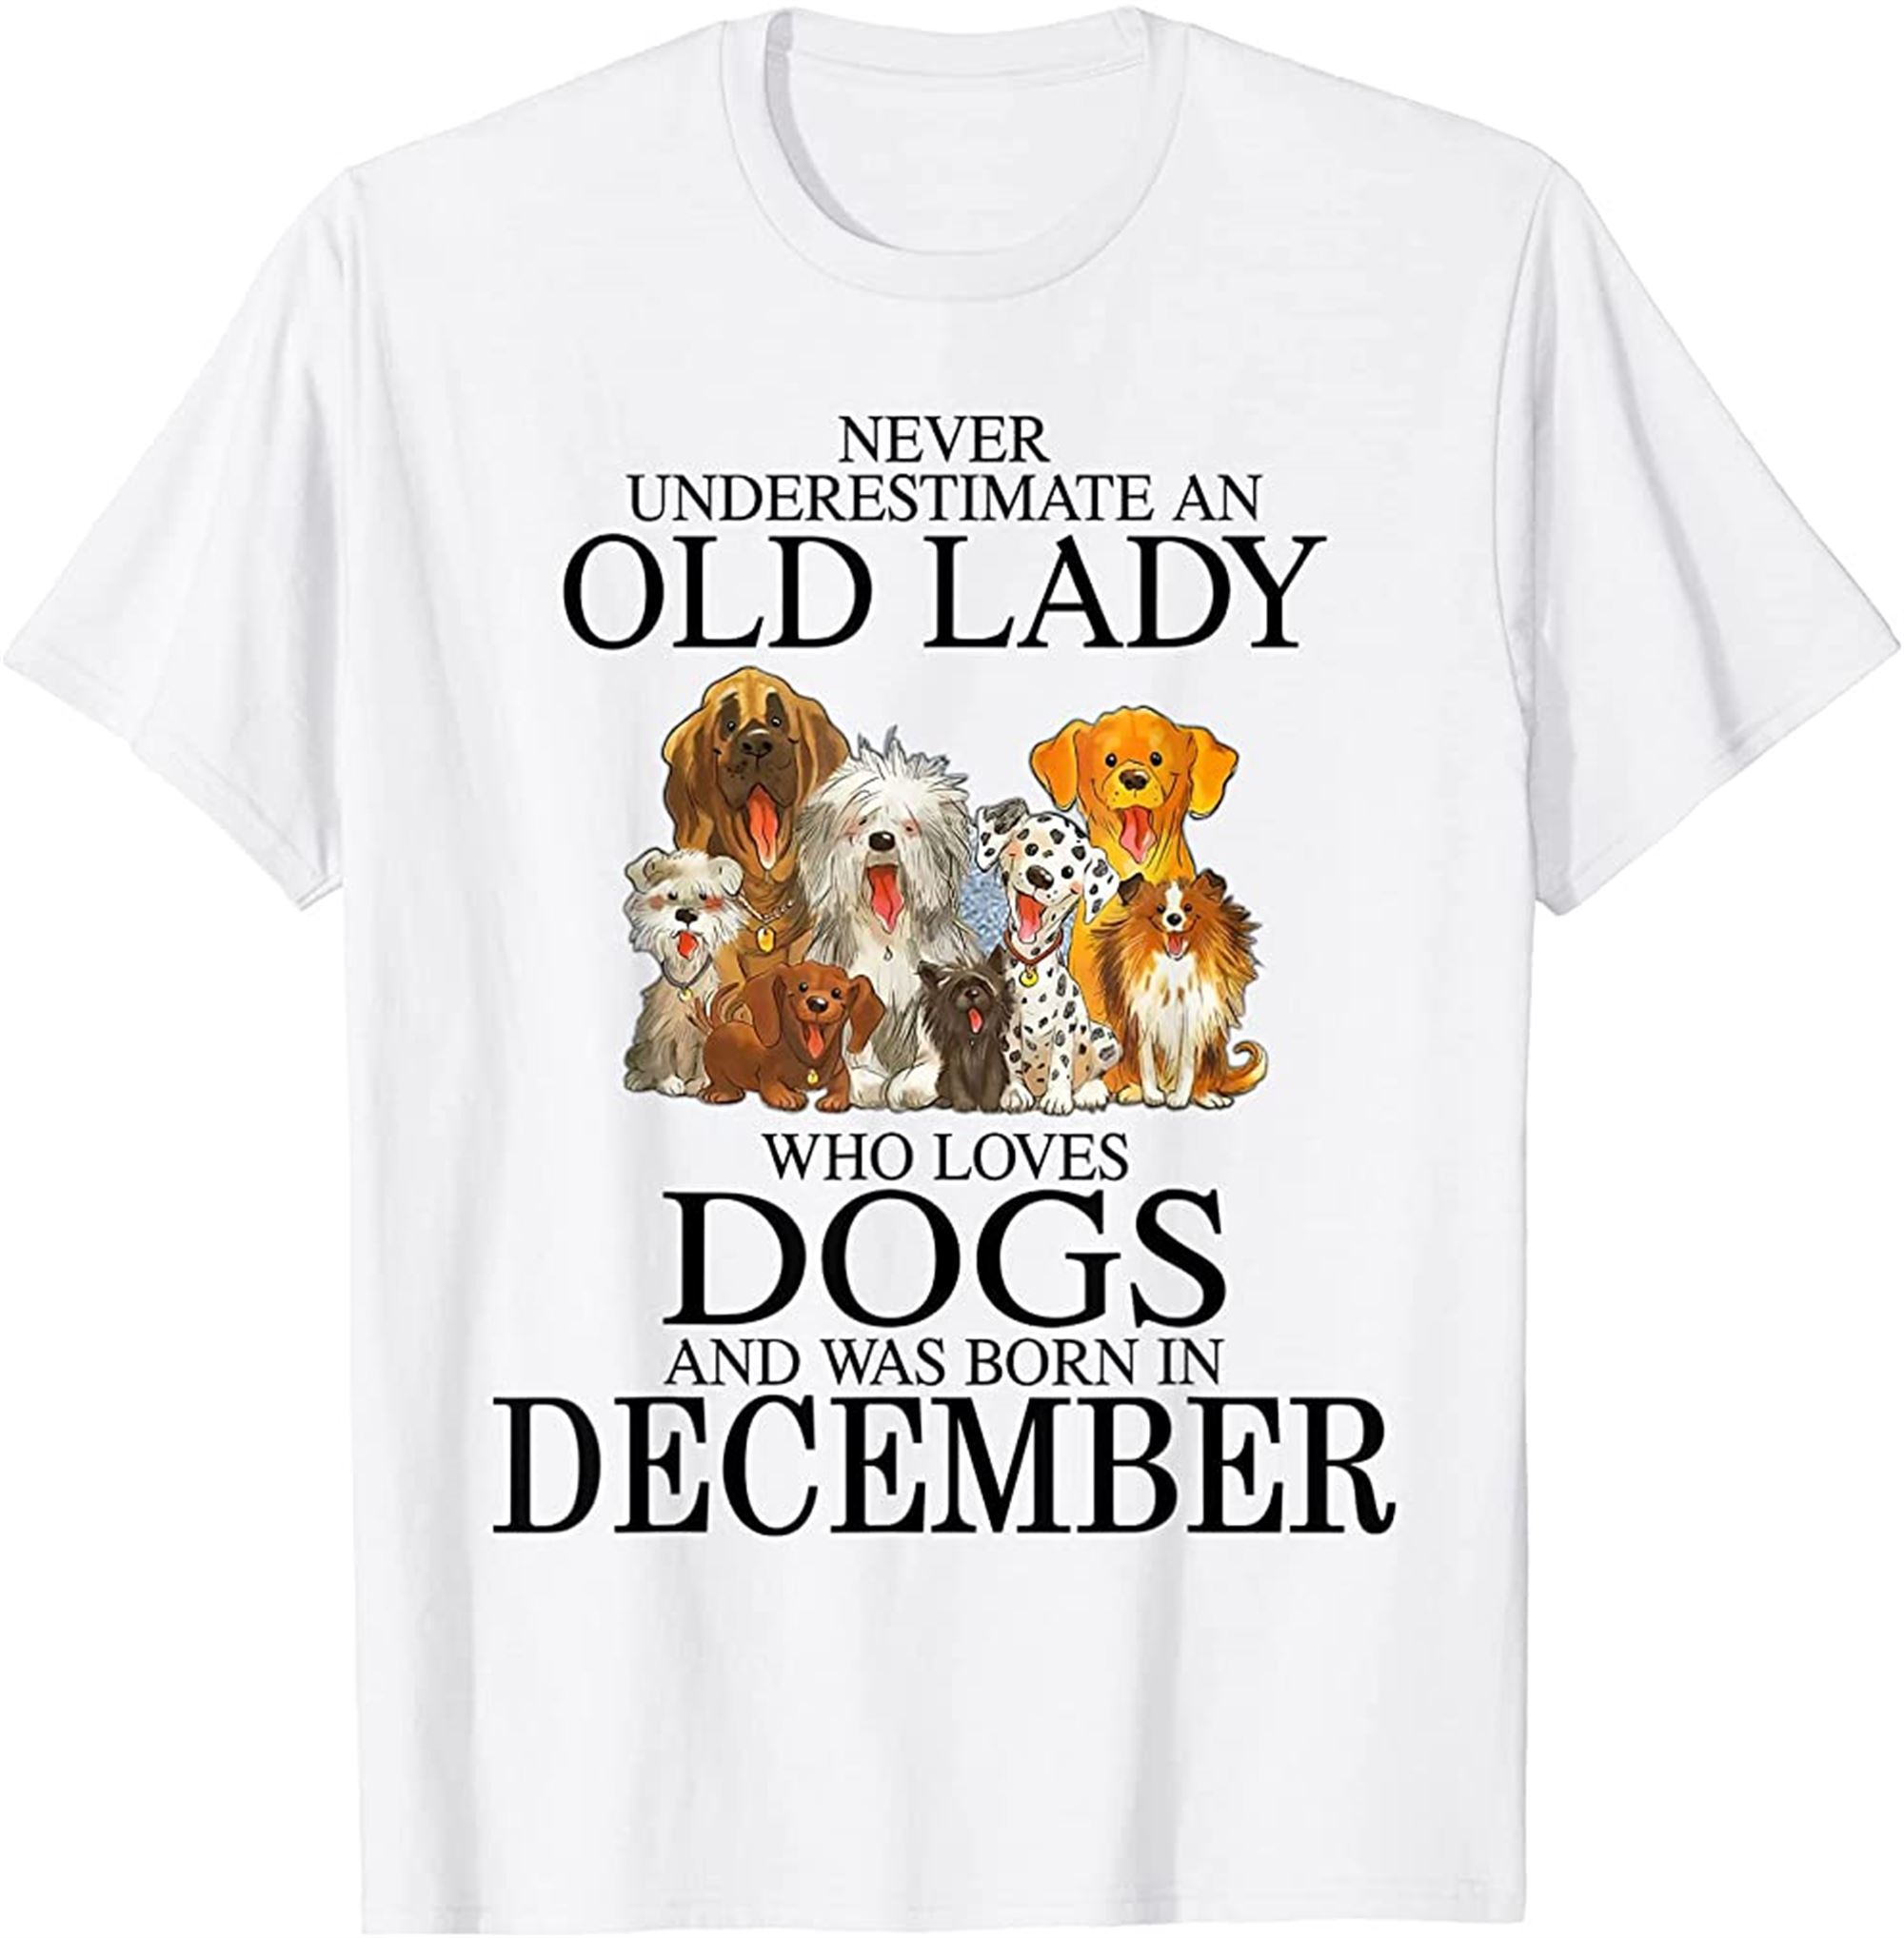 Never Underestimate An Old Lady Who Loves Dogs Born December T-shirt Full Size Up To 5xl